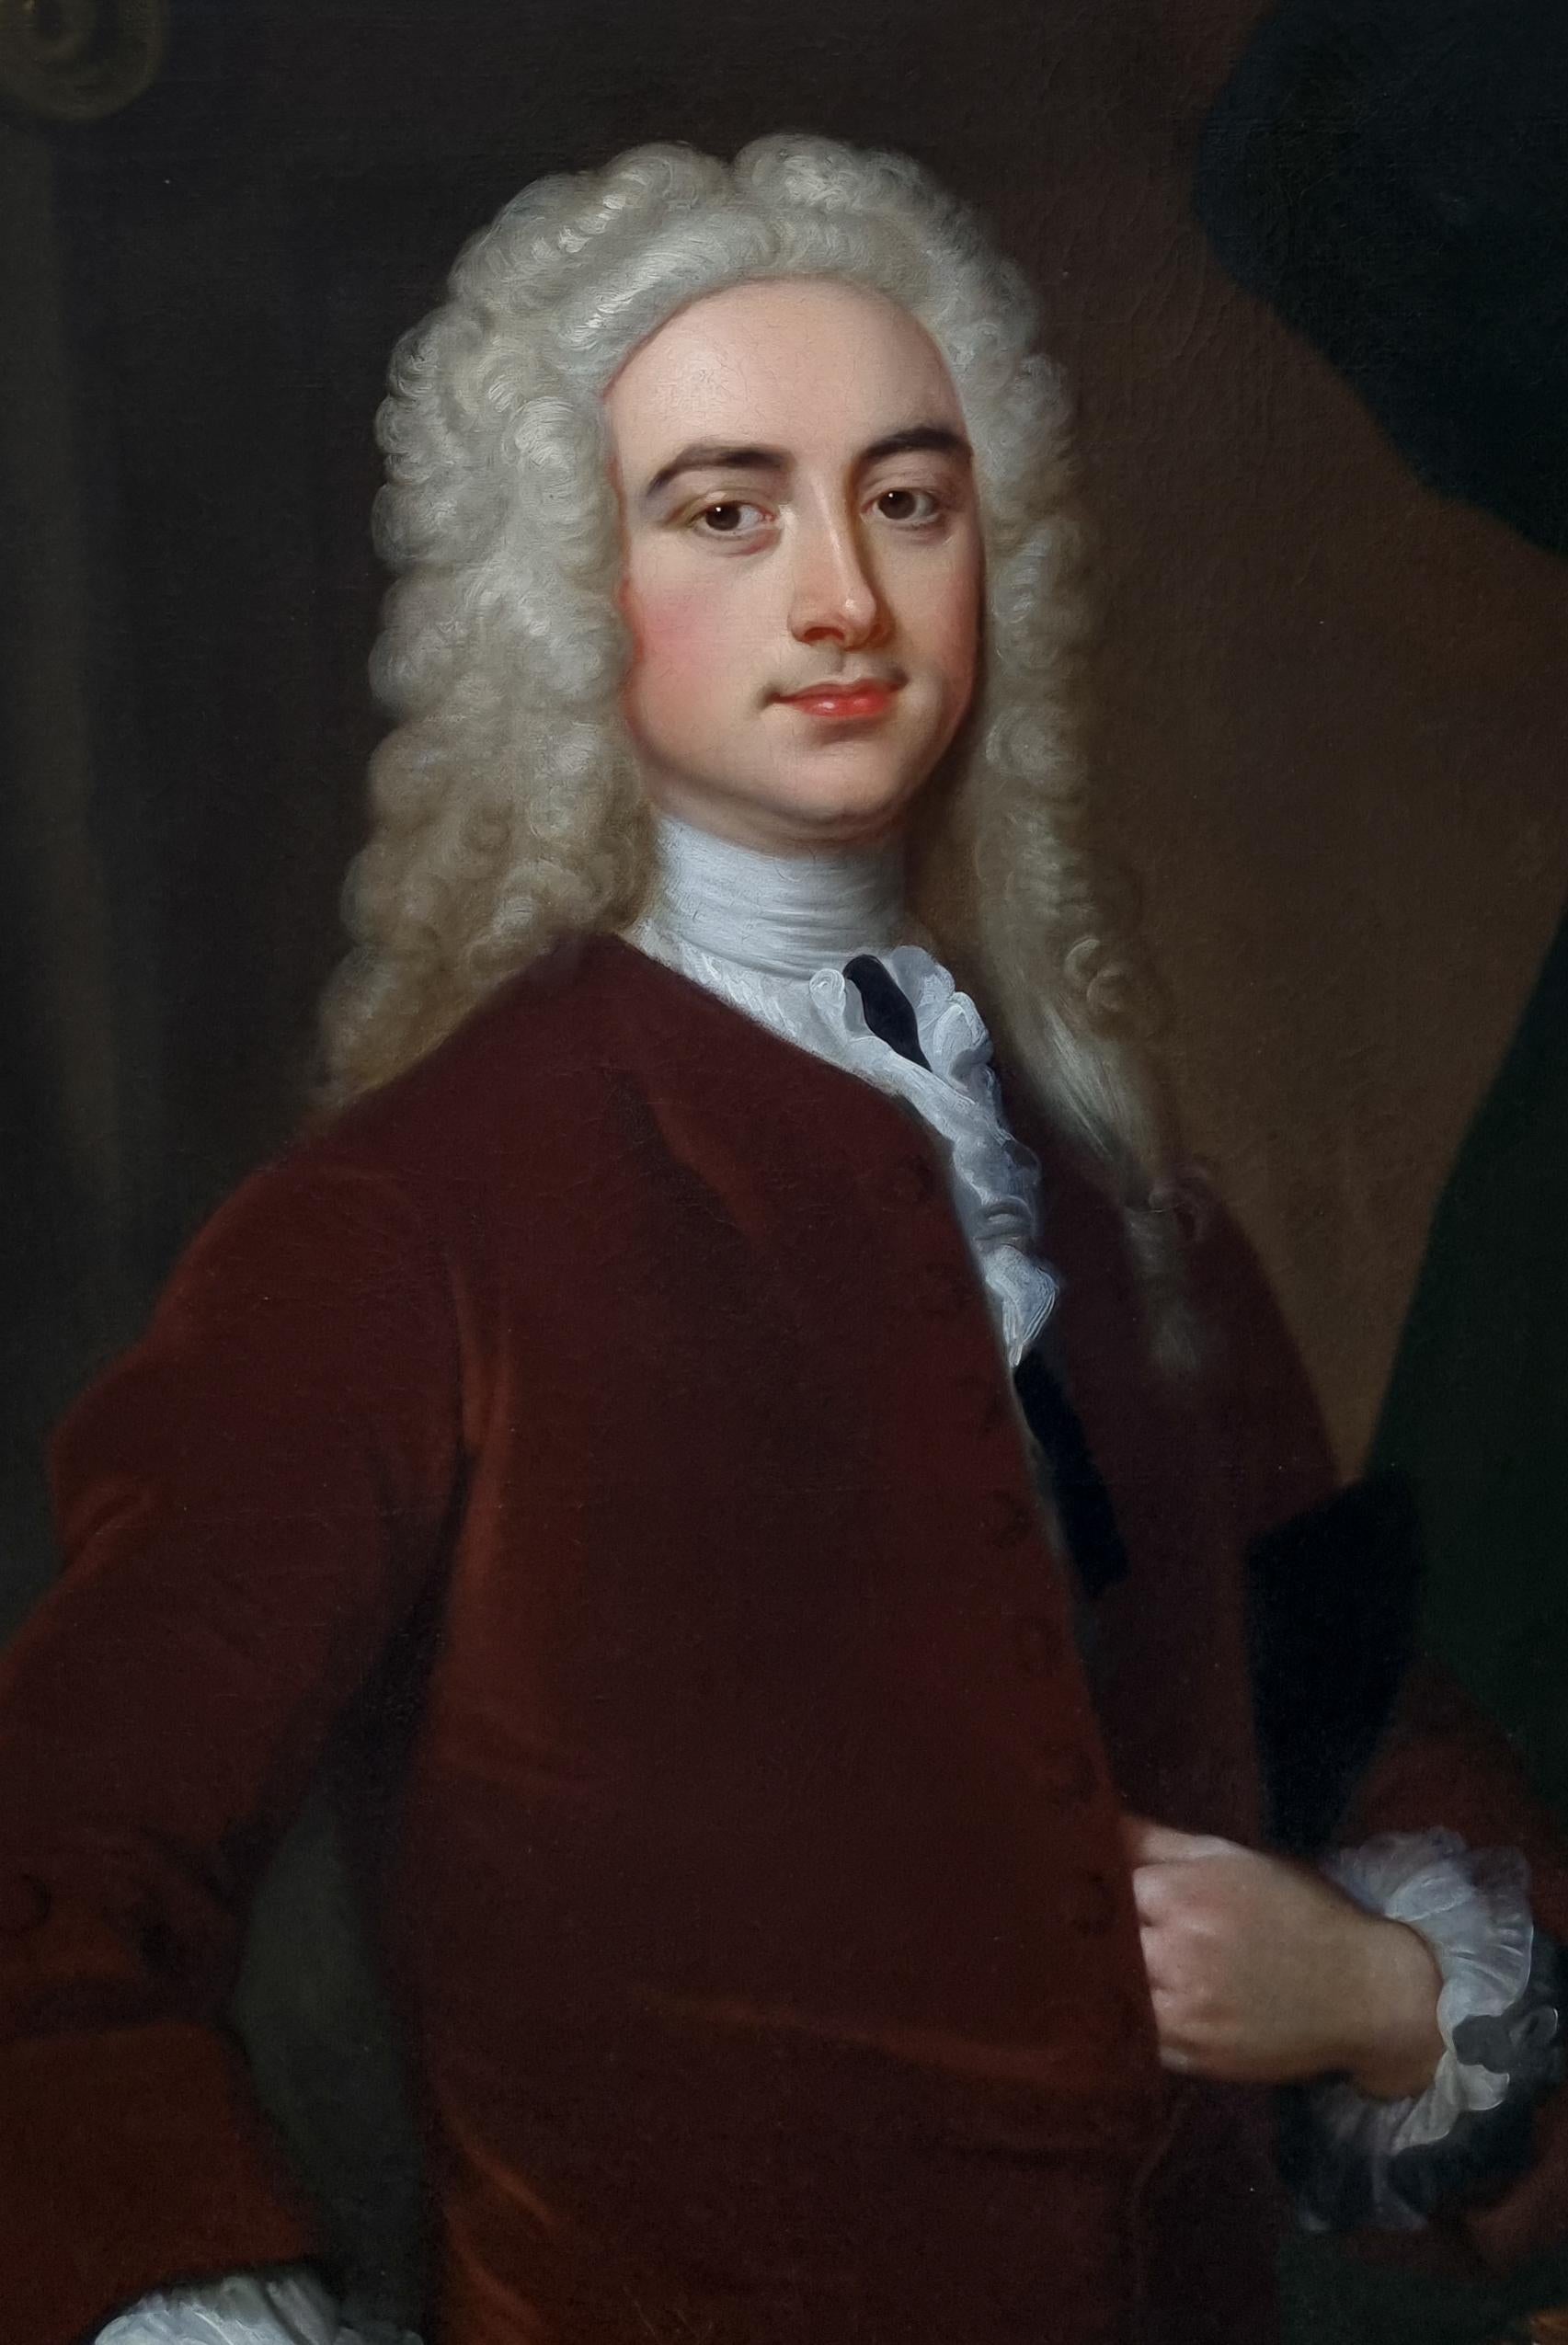 Portrait of a Gentleman, Townsend Andrews c.1725; Thomas Hudson, Oil on canvas 2